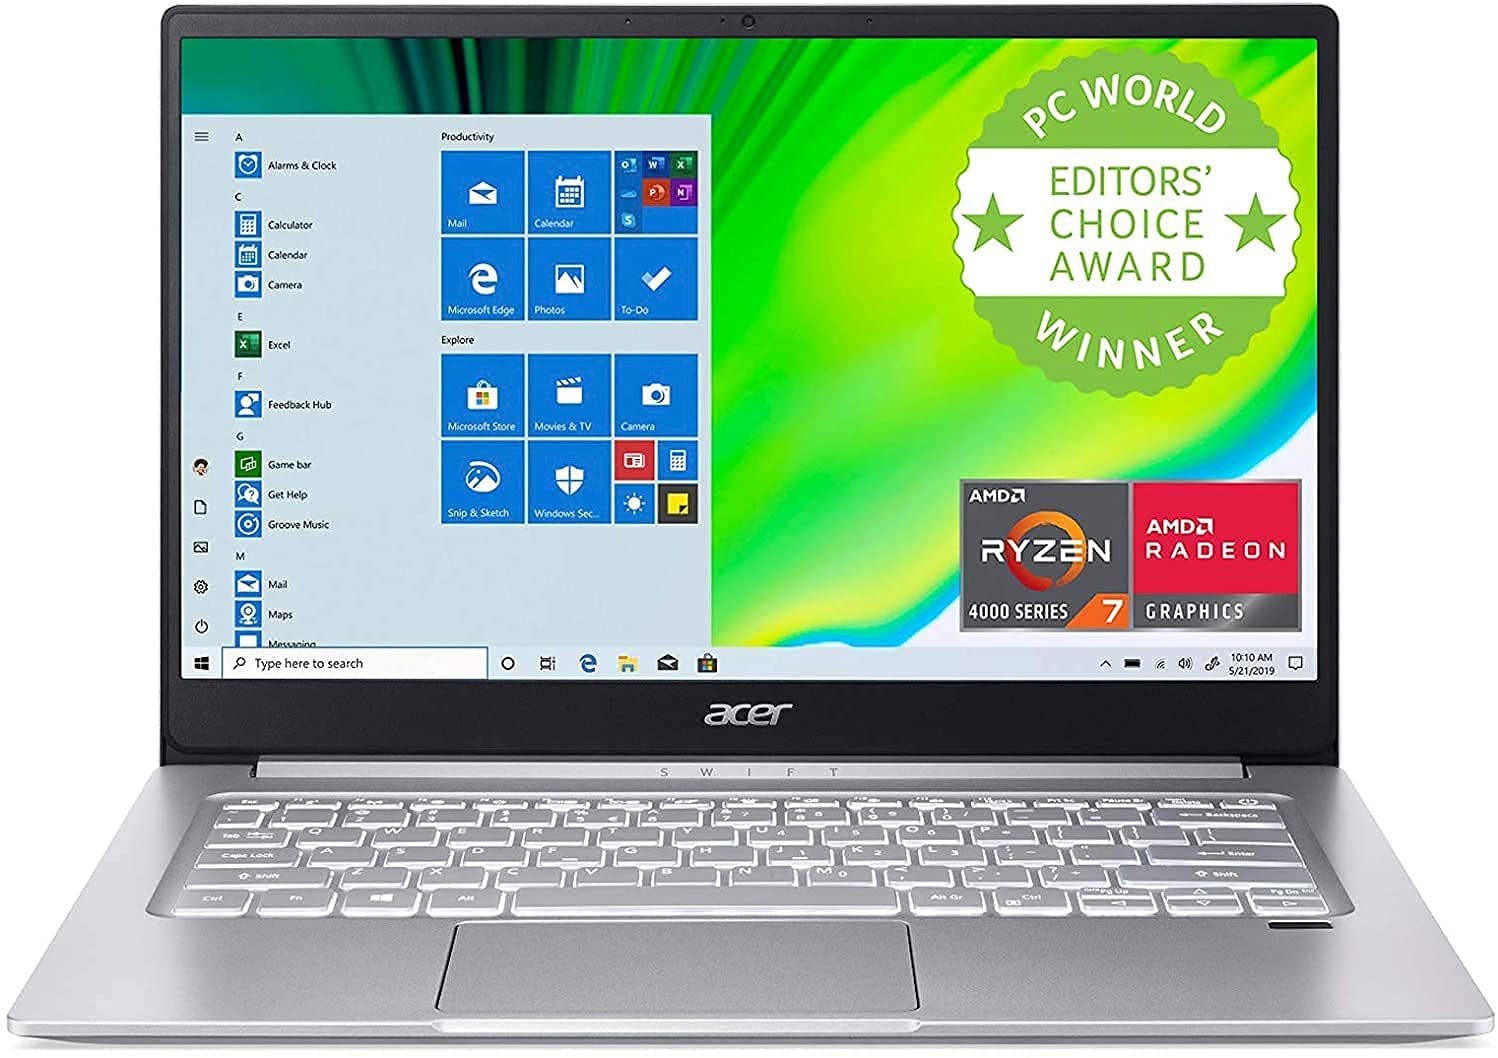 Acer%2Bswift%2B3%2Bthin%2Band%2Blight | Ditulis.id